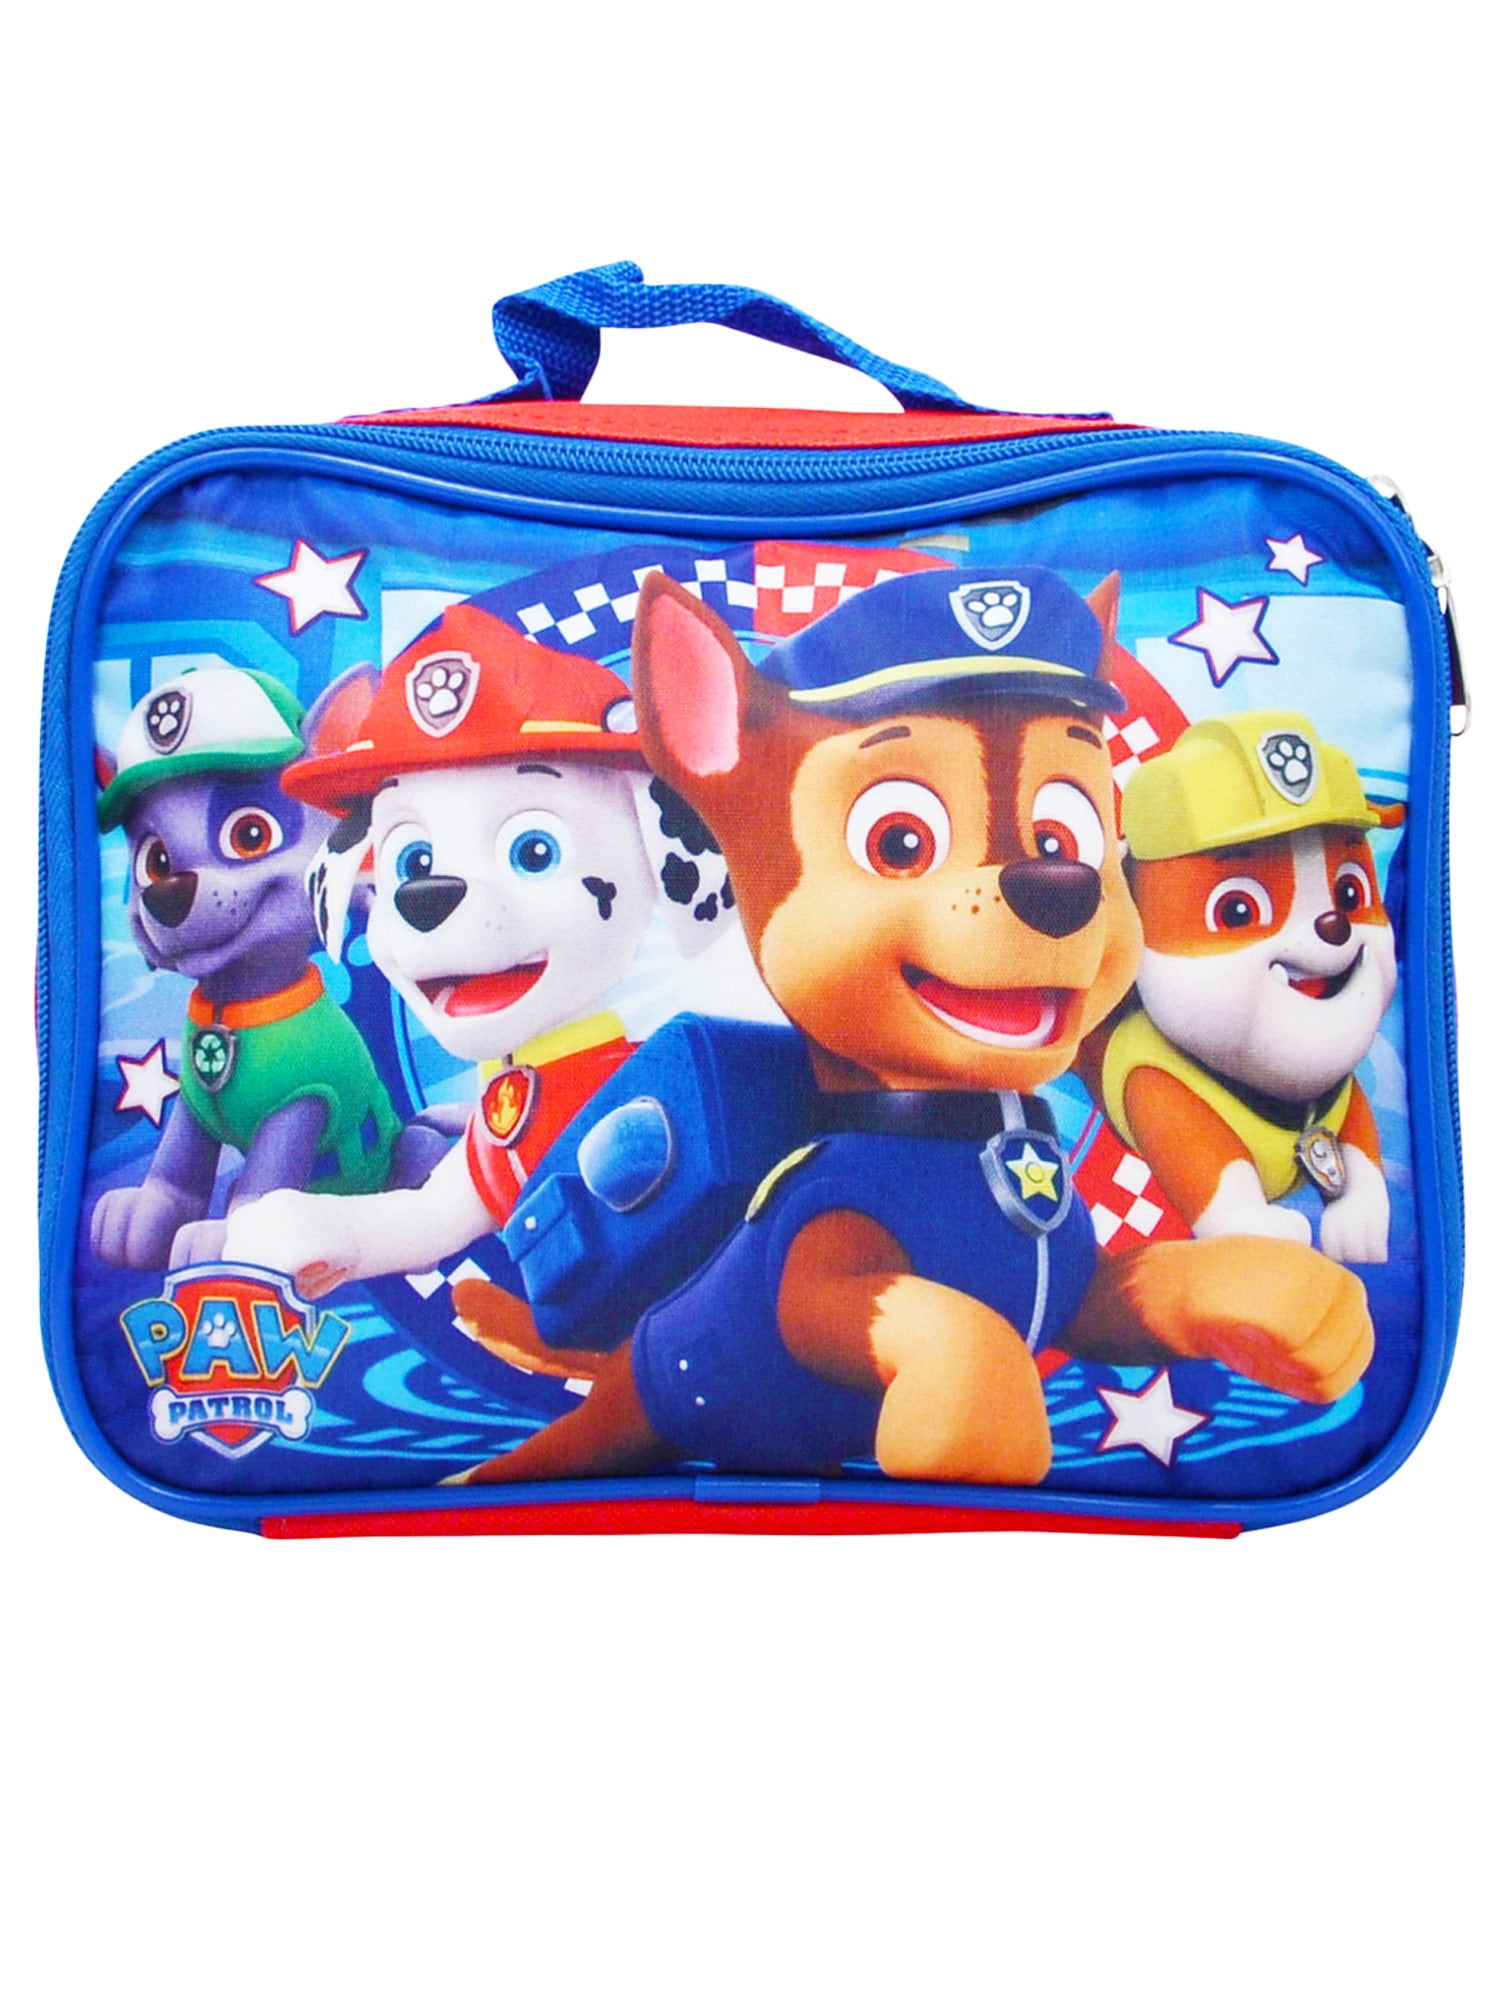 Paw Patrol Marshall Boy Insulated Lunch Box School Bag Food Cooler Kids Toy Gift 